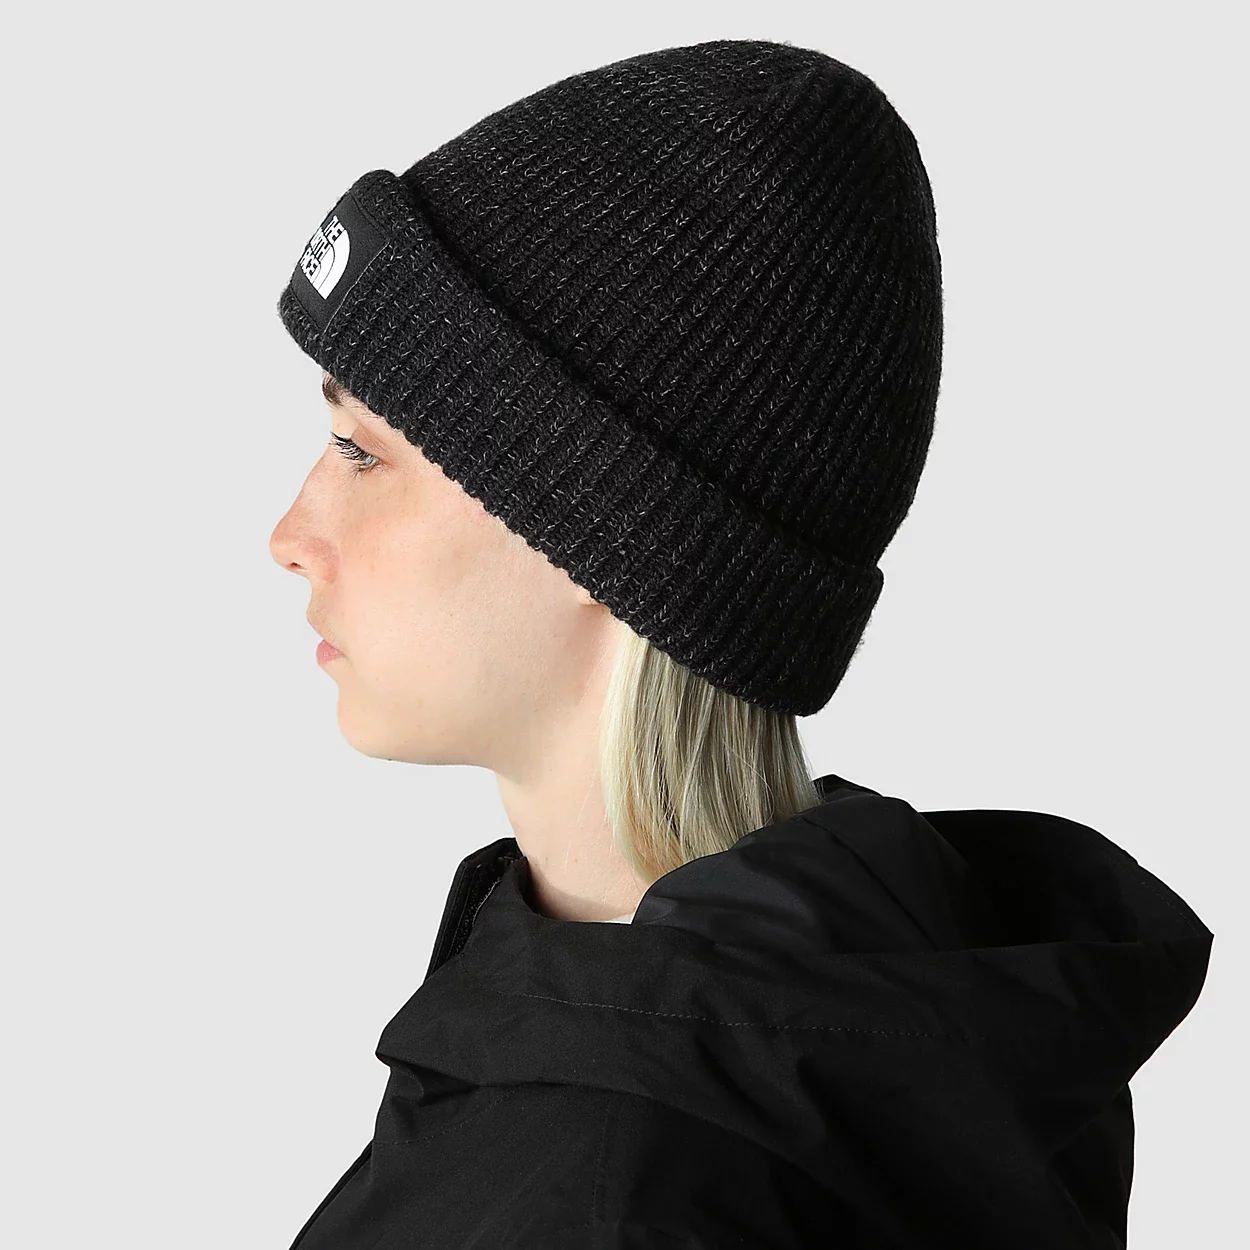 THE NORTH FACE Salty Dog Lined Beanie, TNF Black, One Size Regular at   Men's Clothing store